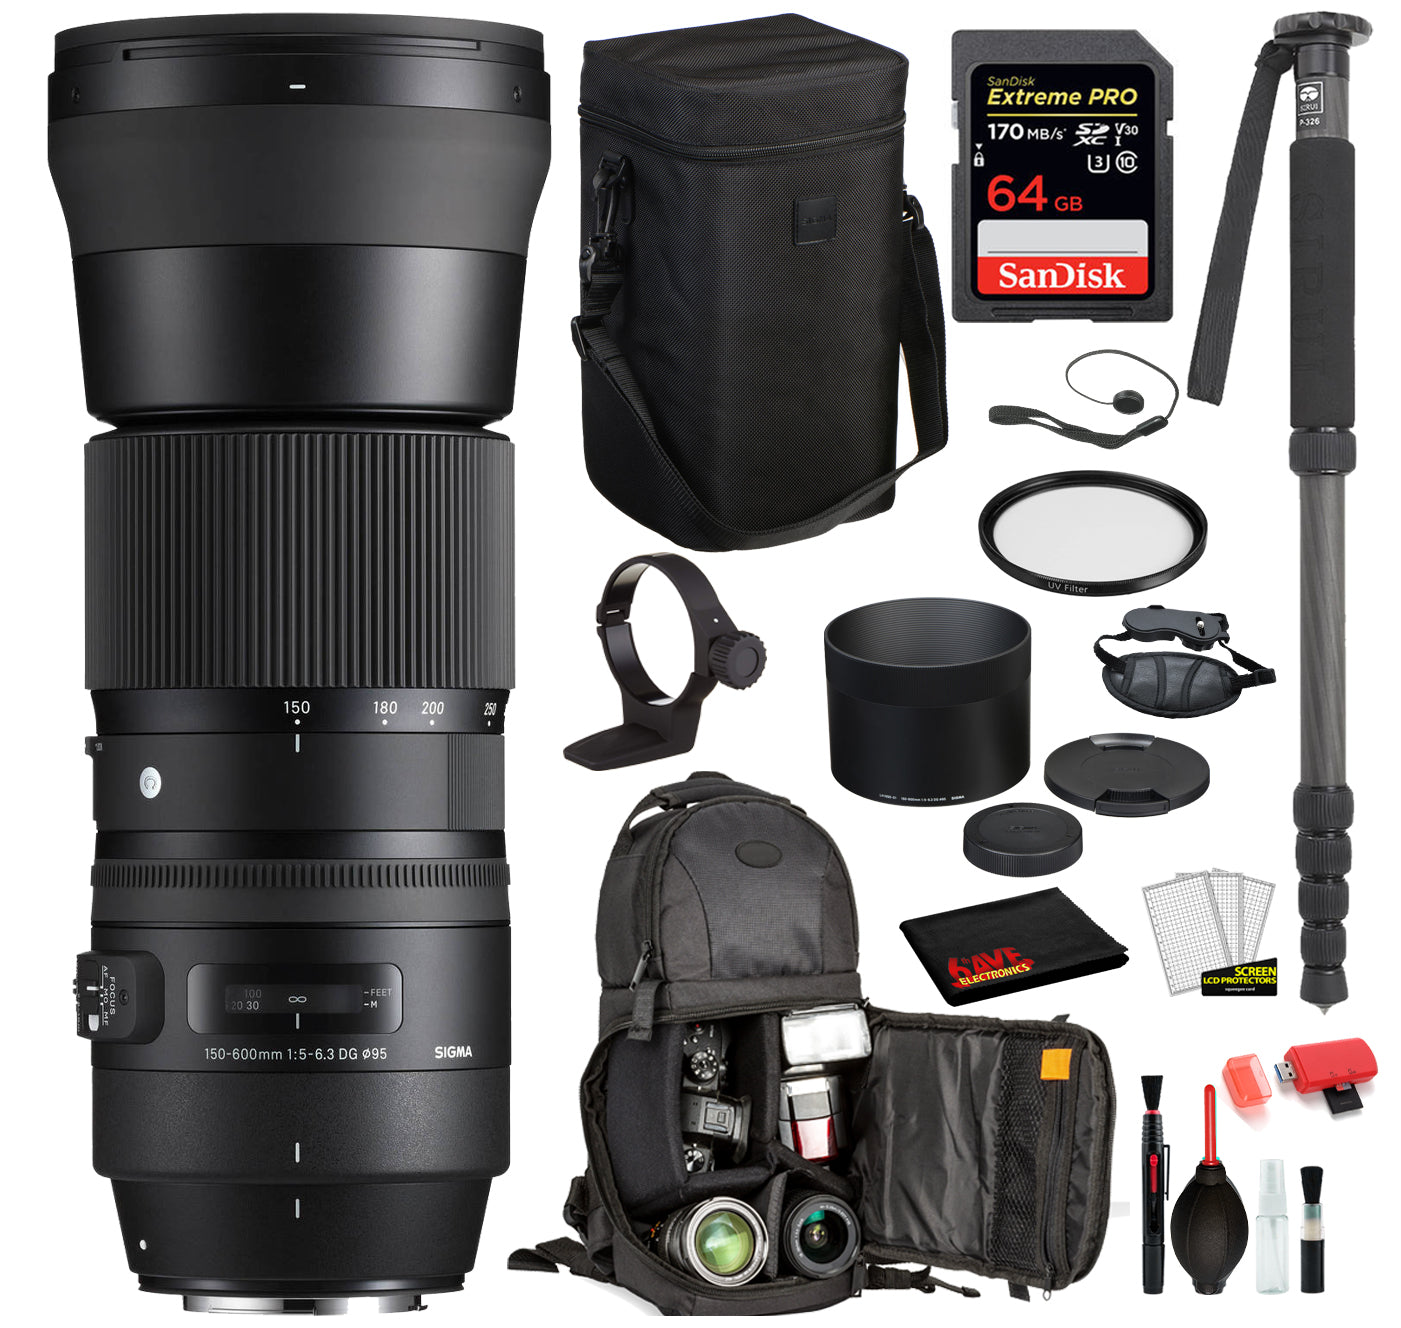 Sigma 150-600mm f/5-6.3 DG OS HSM Contemporary Lens for Canon EF with Bundles: SanDisk Extreme Pro 64gb SD Card + More